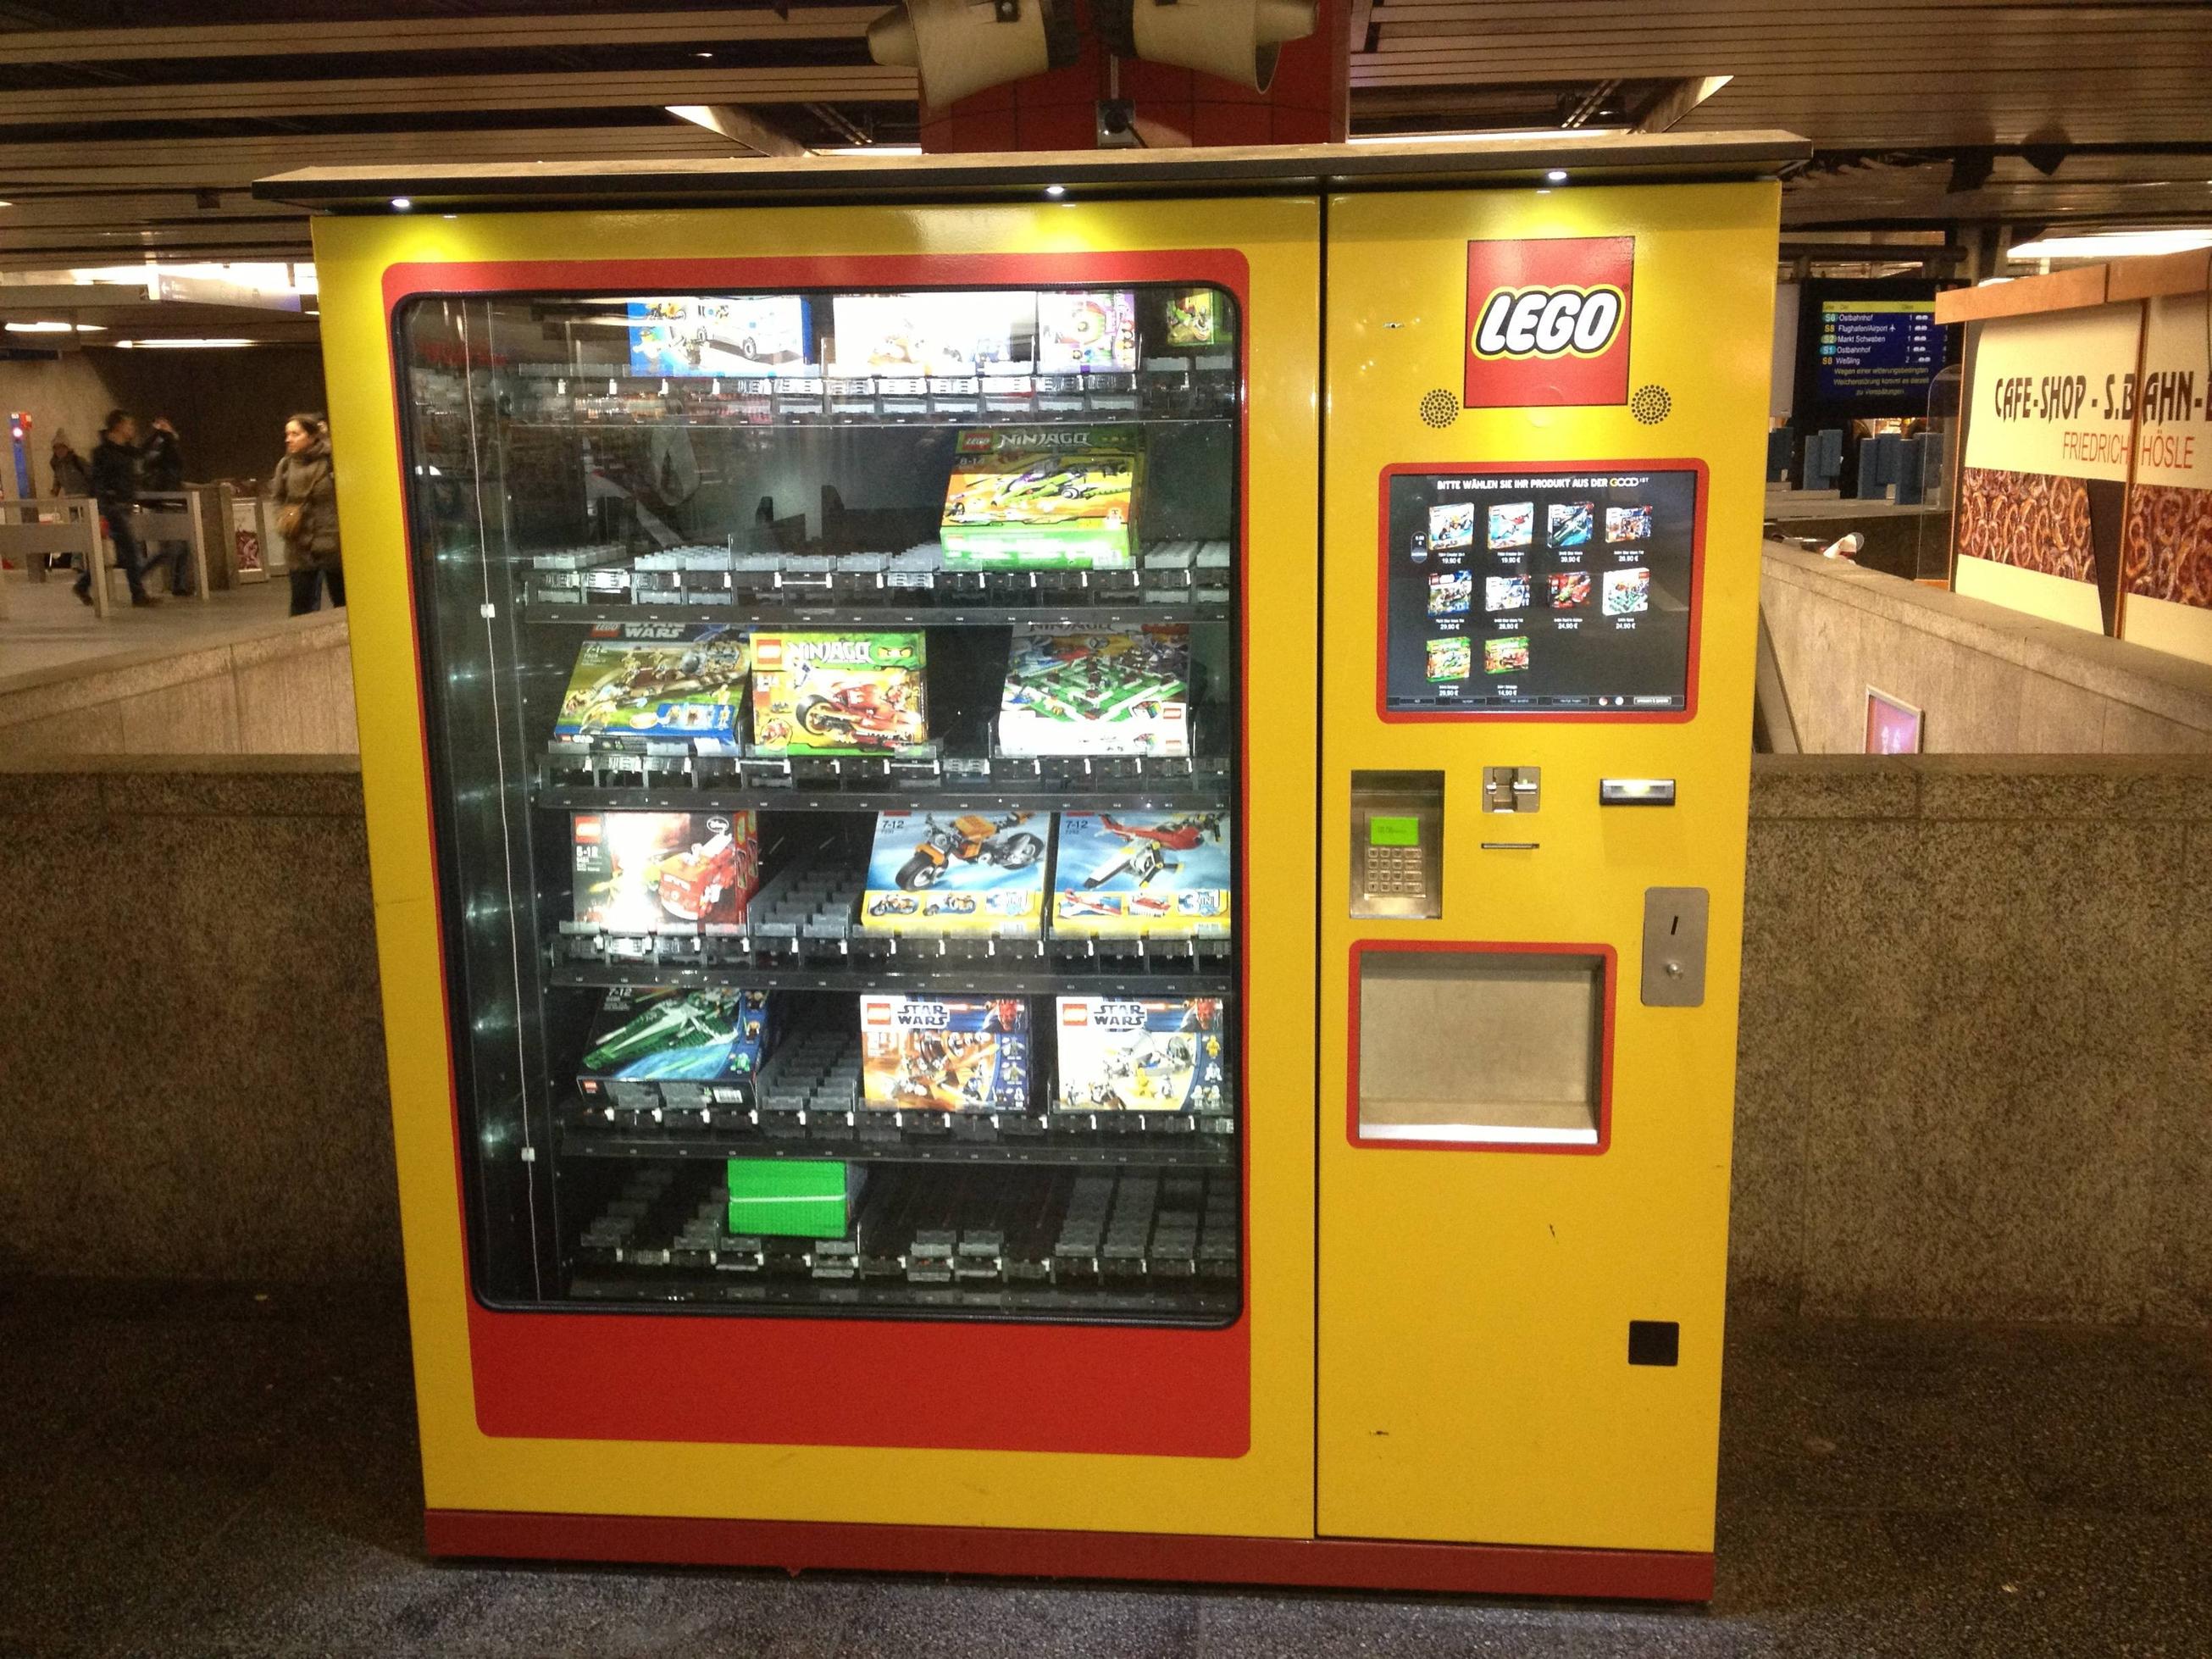 Lego Vending Machine At The Munich Train Station In Germany